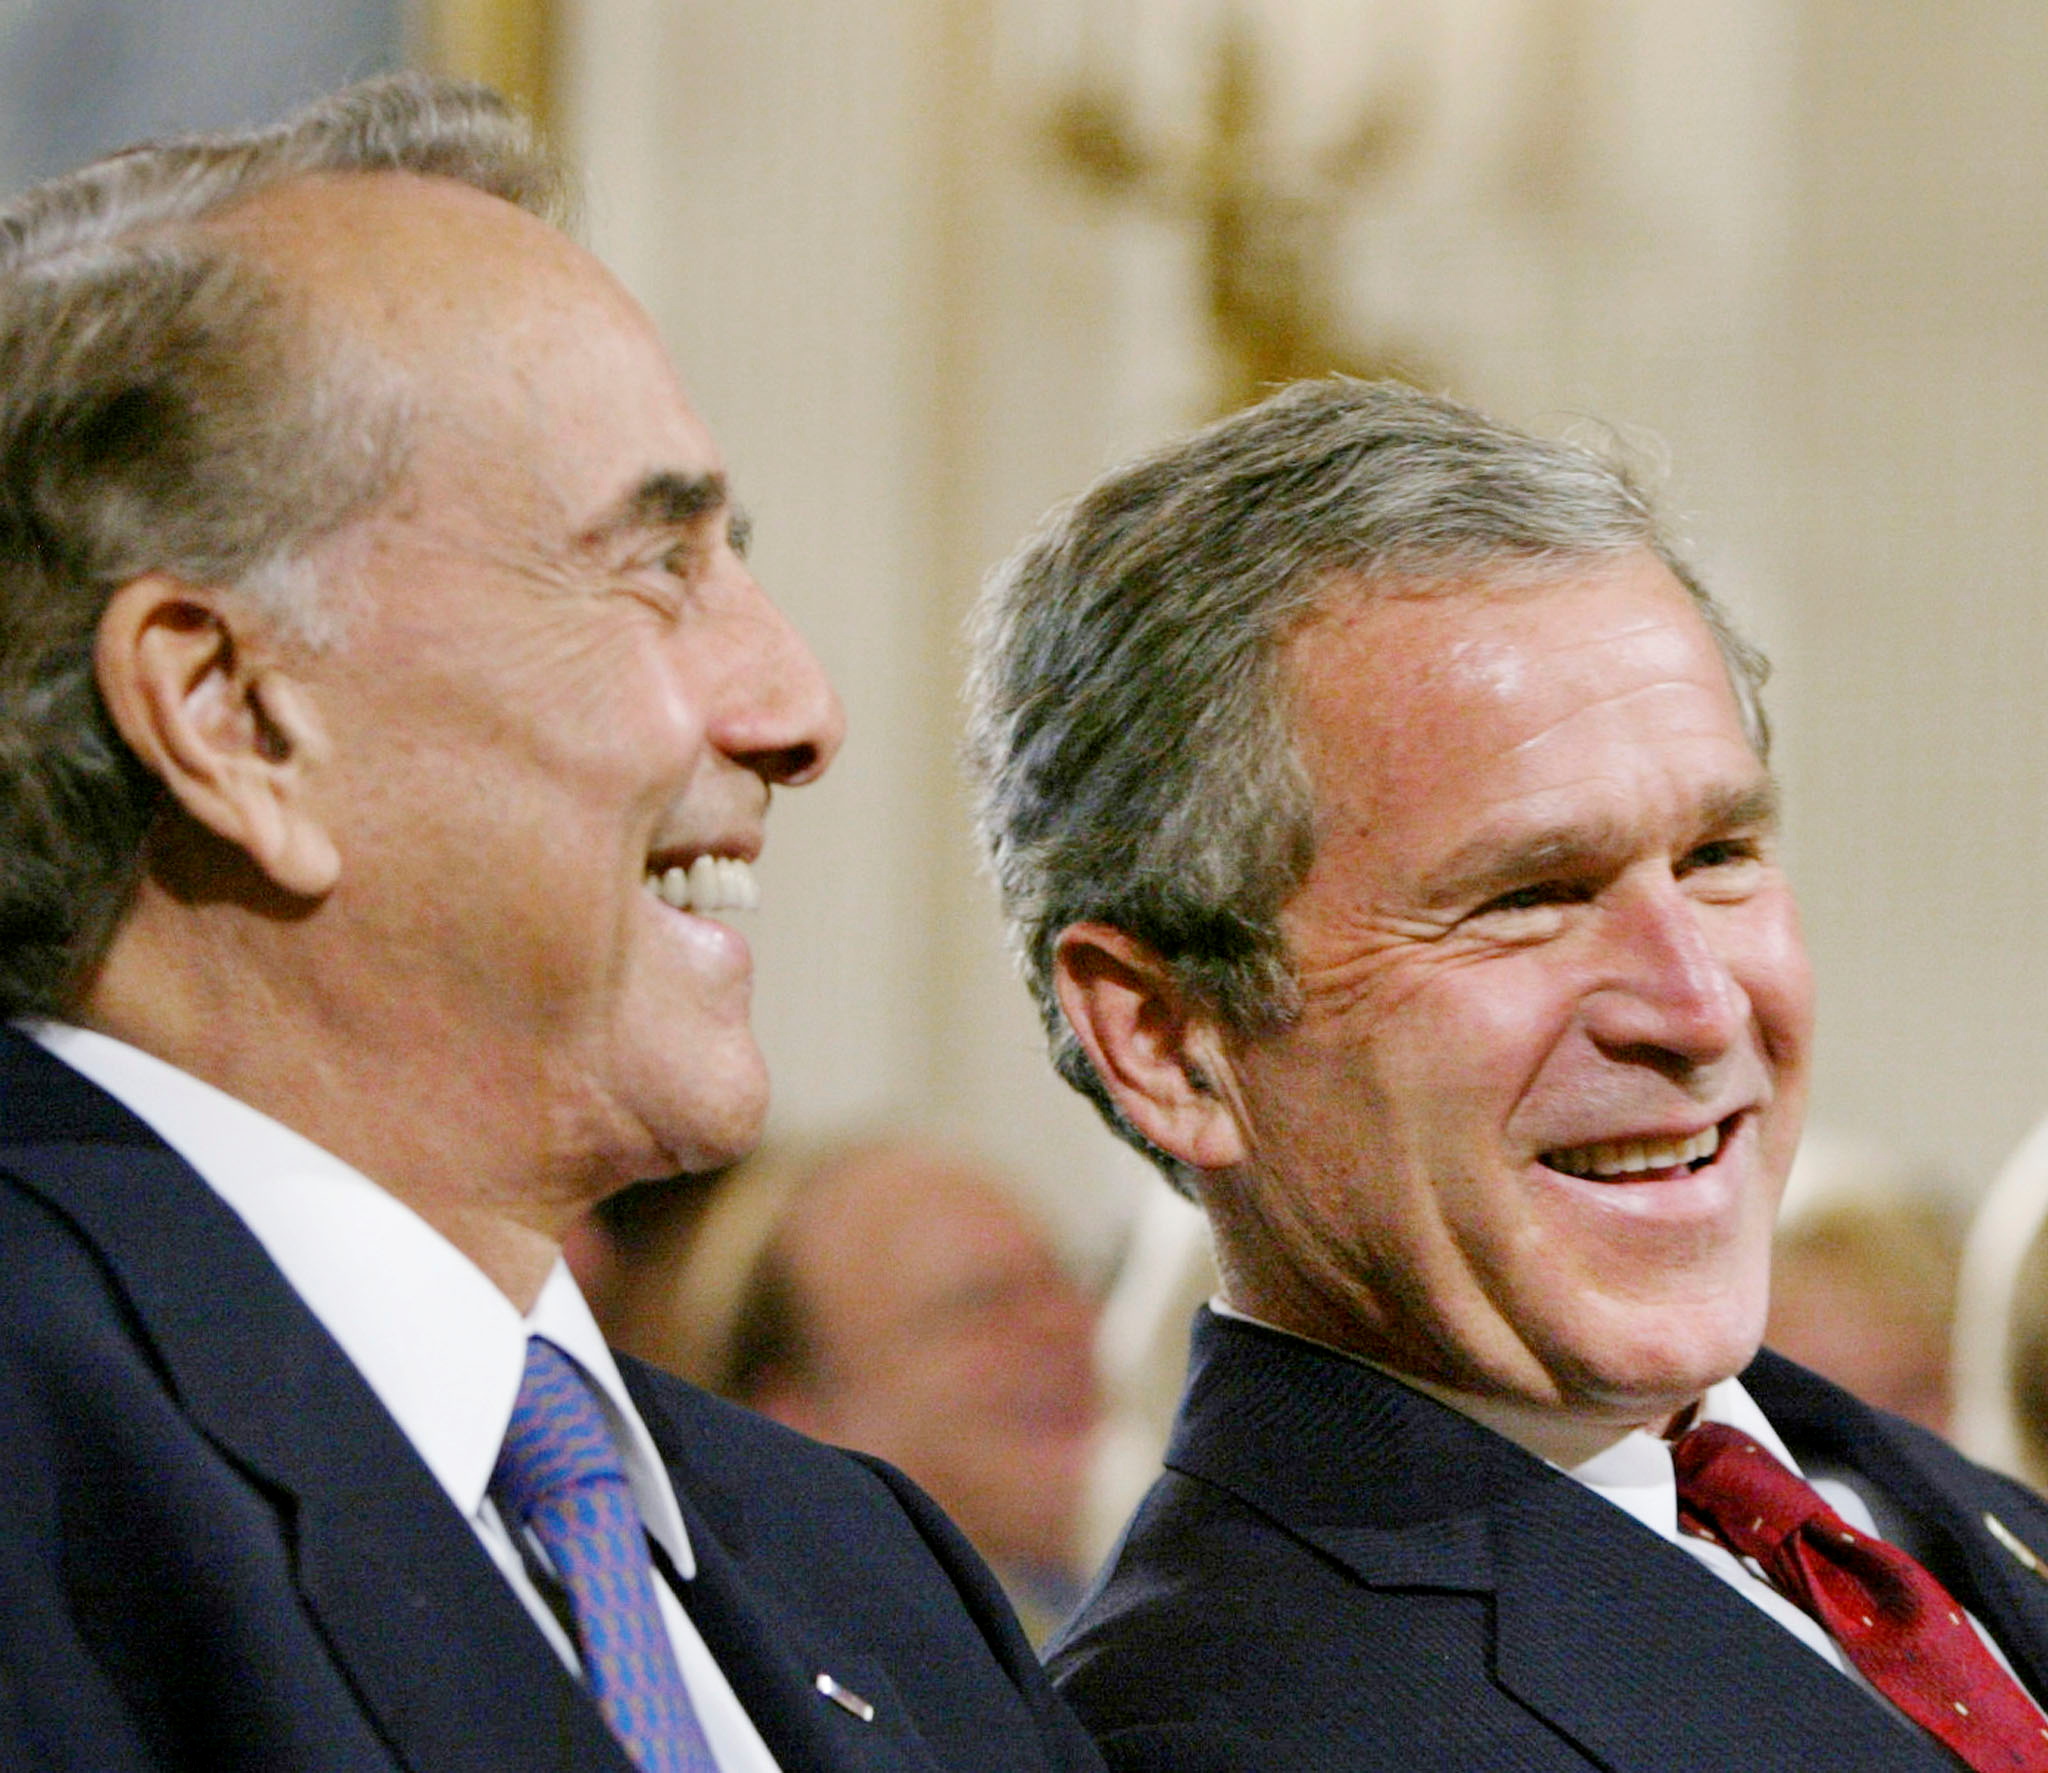 U.S. President George W. Bush sits with former U.S. Senator Bob Dole during a ceremony honoring the six-month anniversary of the USA Freedom Corps, in the East Room of the White House, July 30, 2002. REUTERS/Larry Downing/File Photo